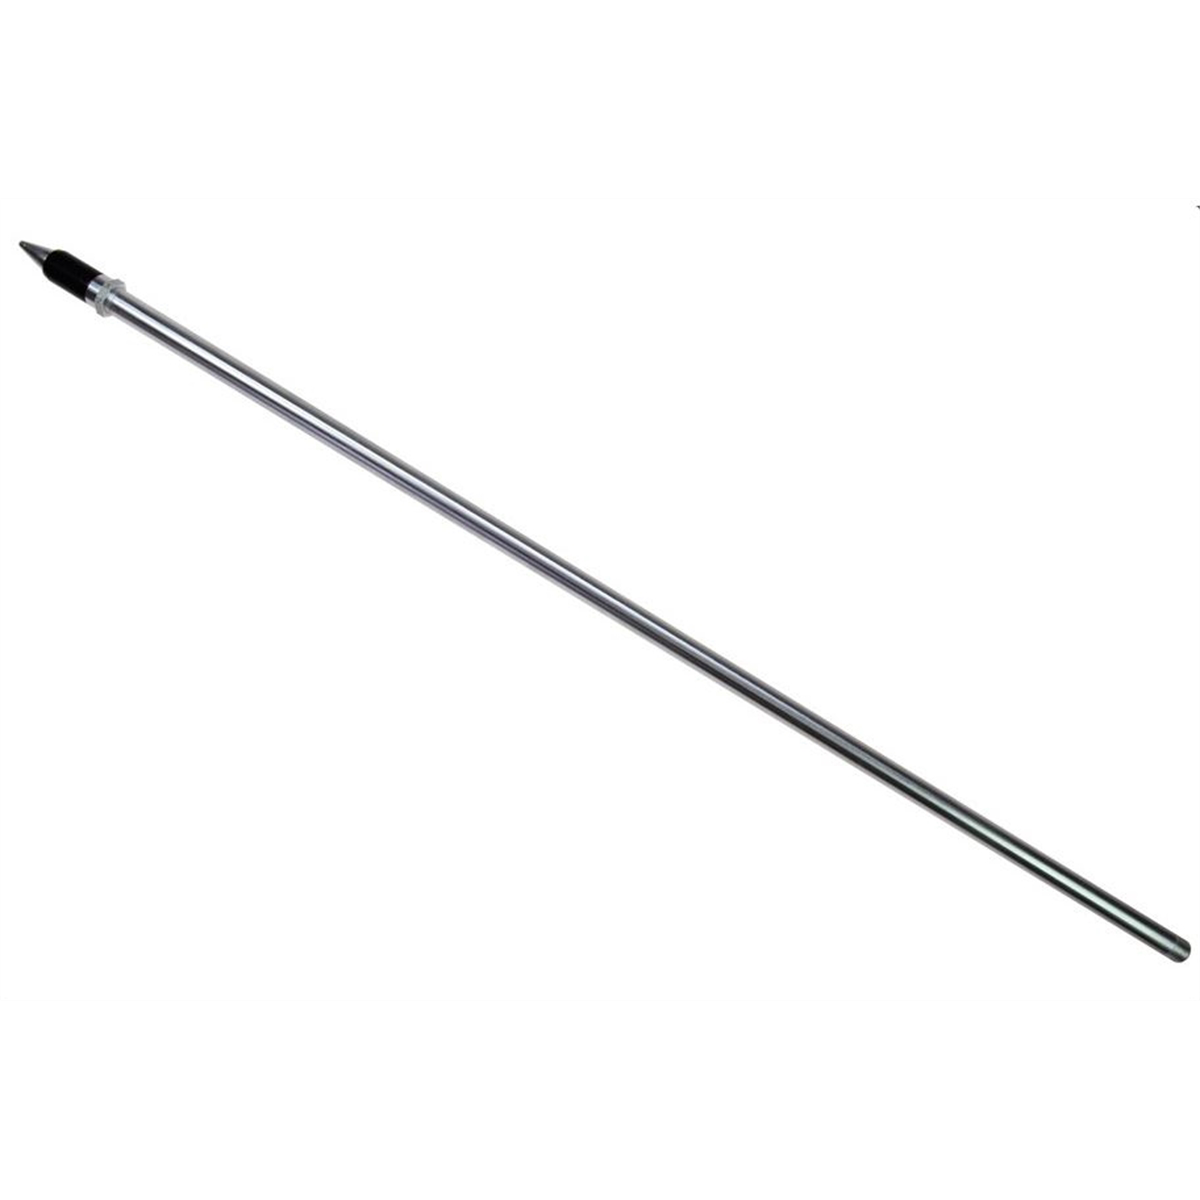 TYPHOON- 24" EXTENSION WITH HIGH-VOLUME(STD) TIP